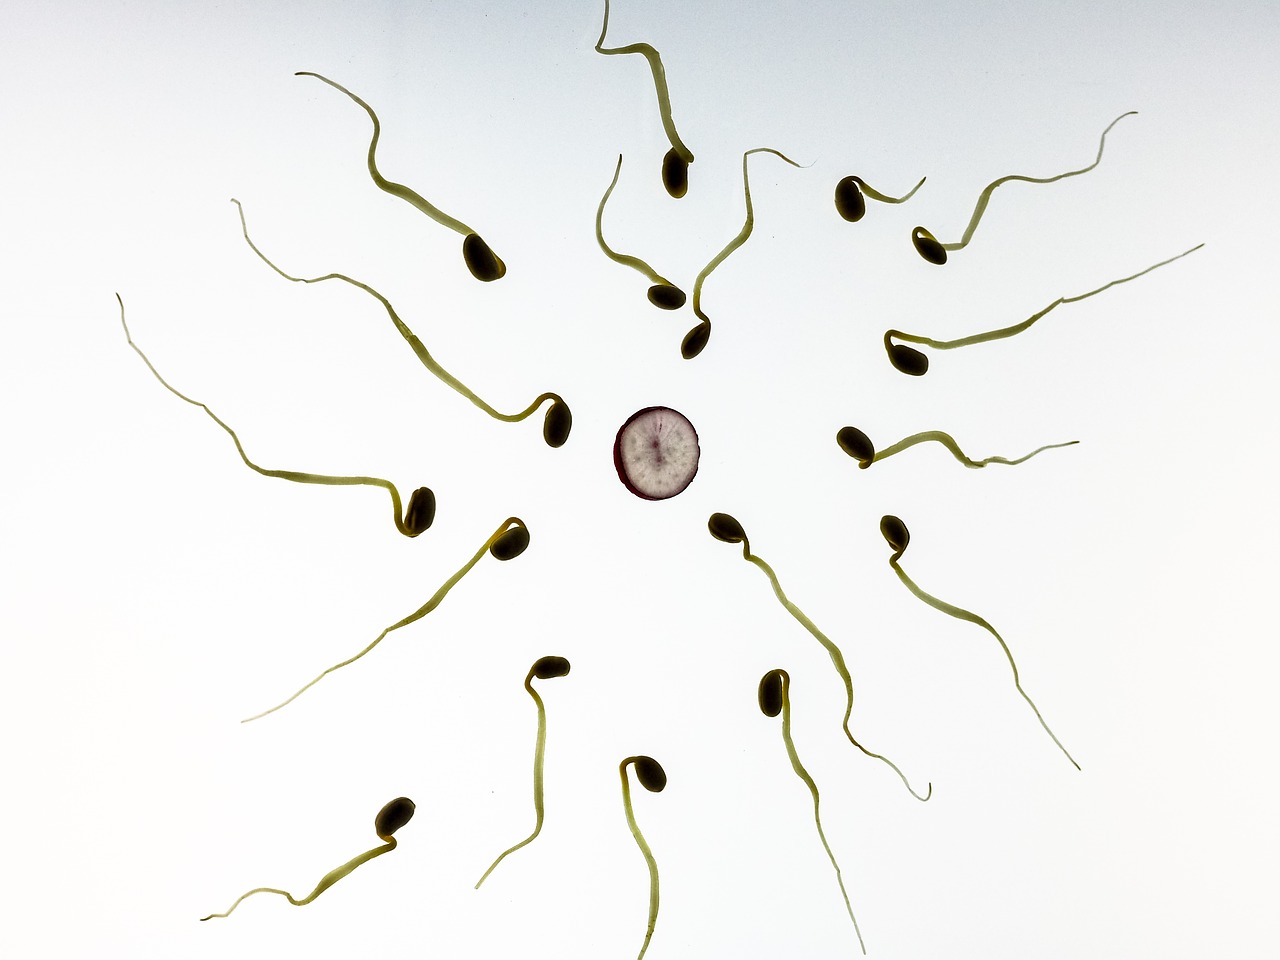 DILEMMA | Will I be forced to pay for a child for which I donated sperm?